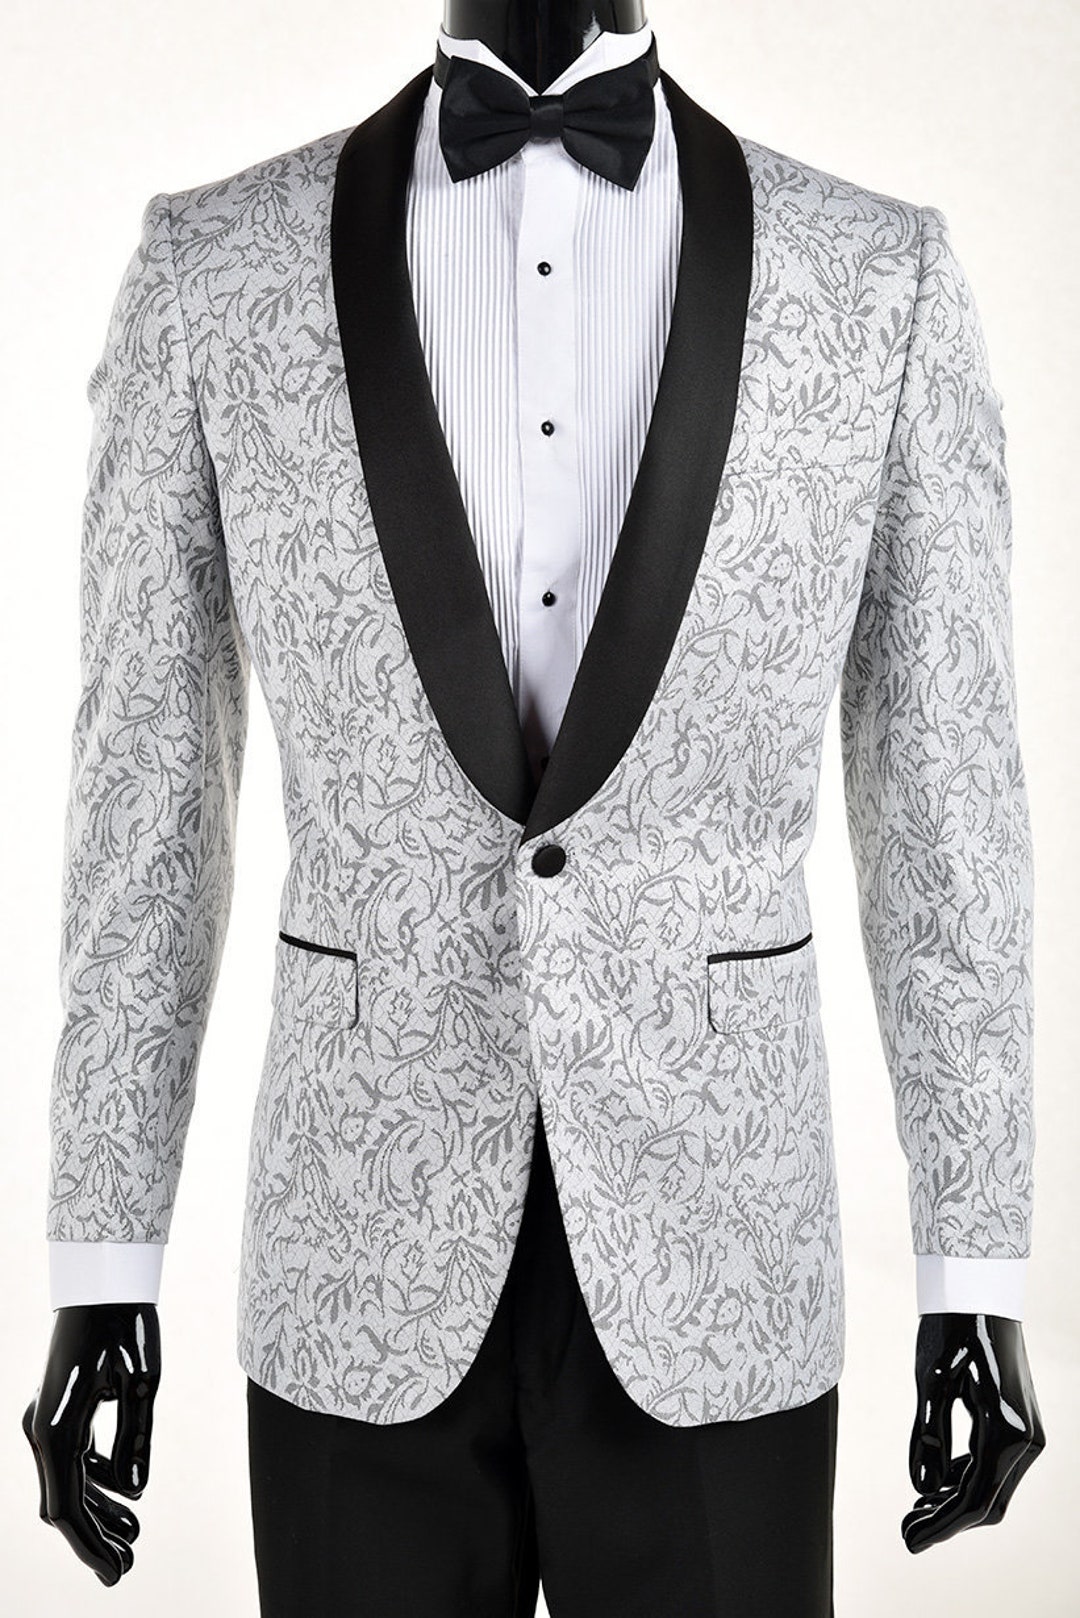 Mens Premium Slim Fit Silver Gray With Black Paisley Patterned Tuxedo ...